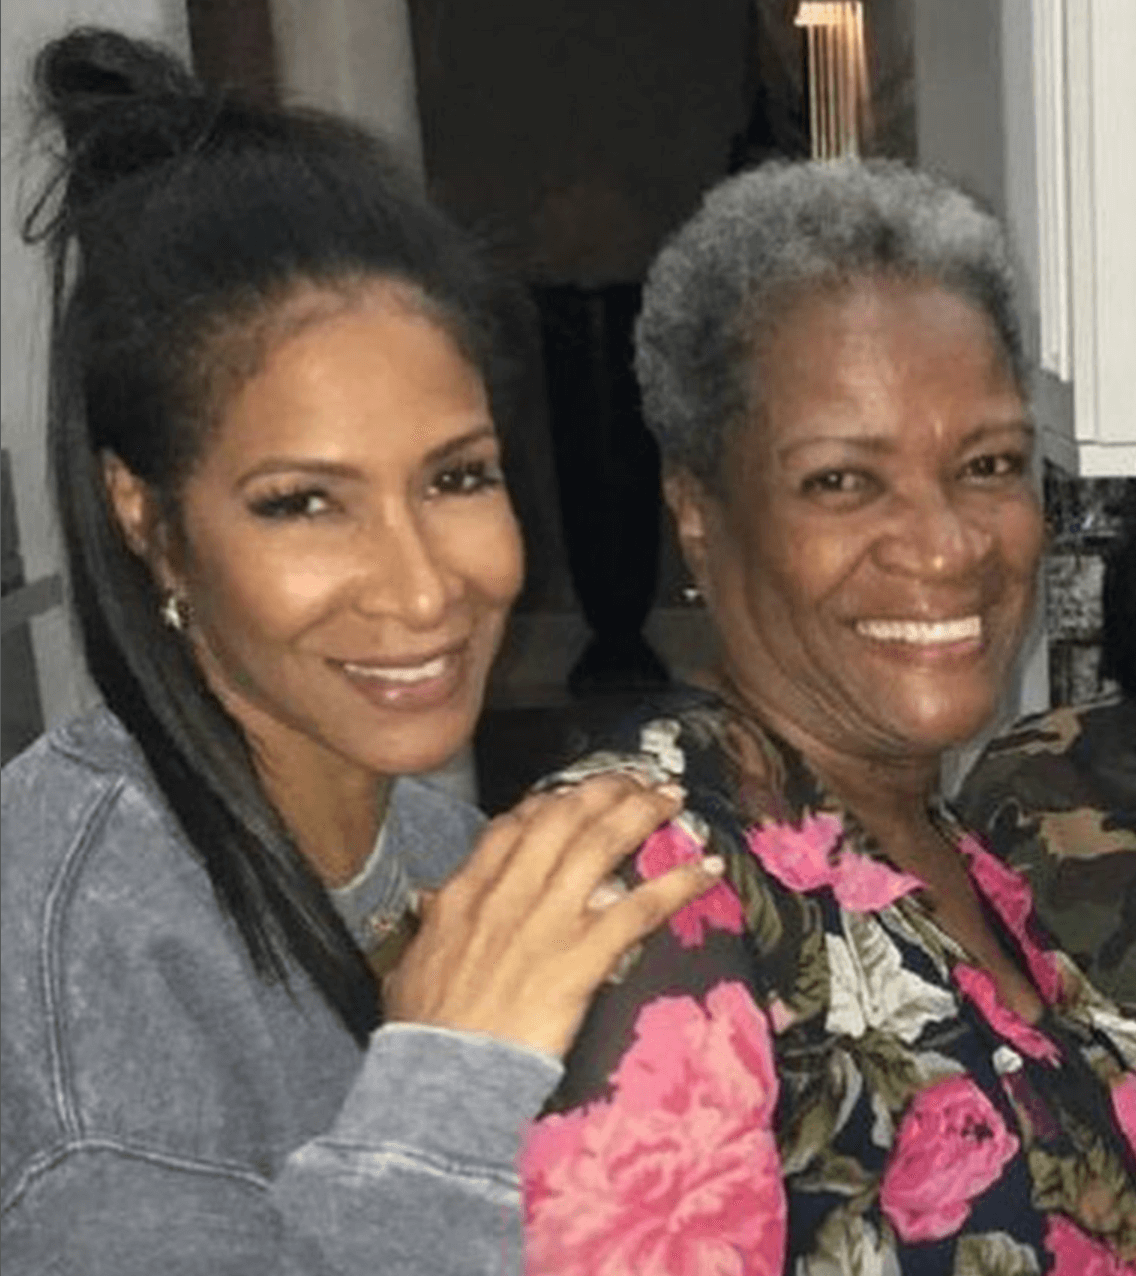 RHOA Star Shereé Whitfield’s Mother Has Been Missing Since March 23!